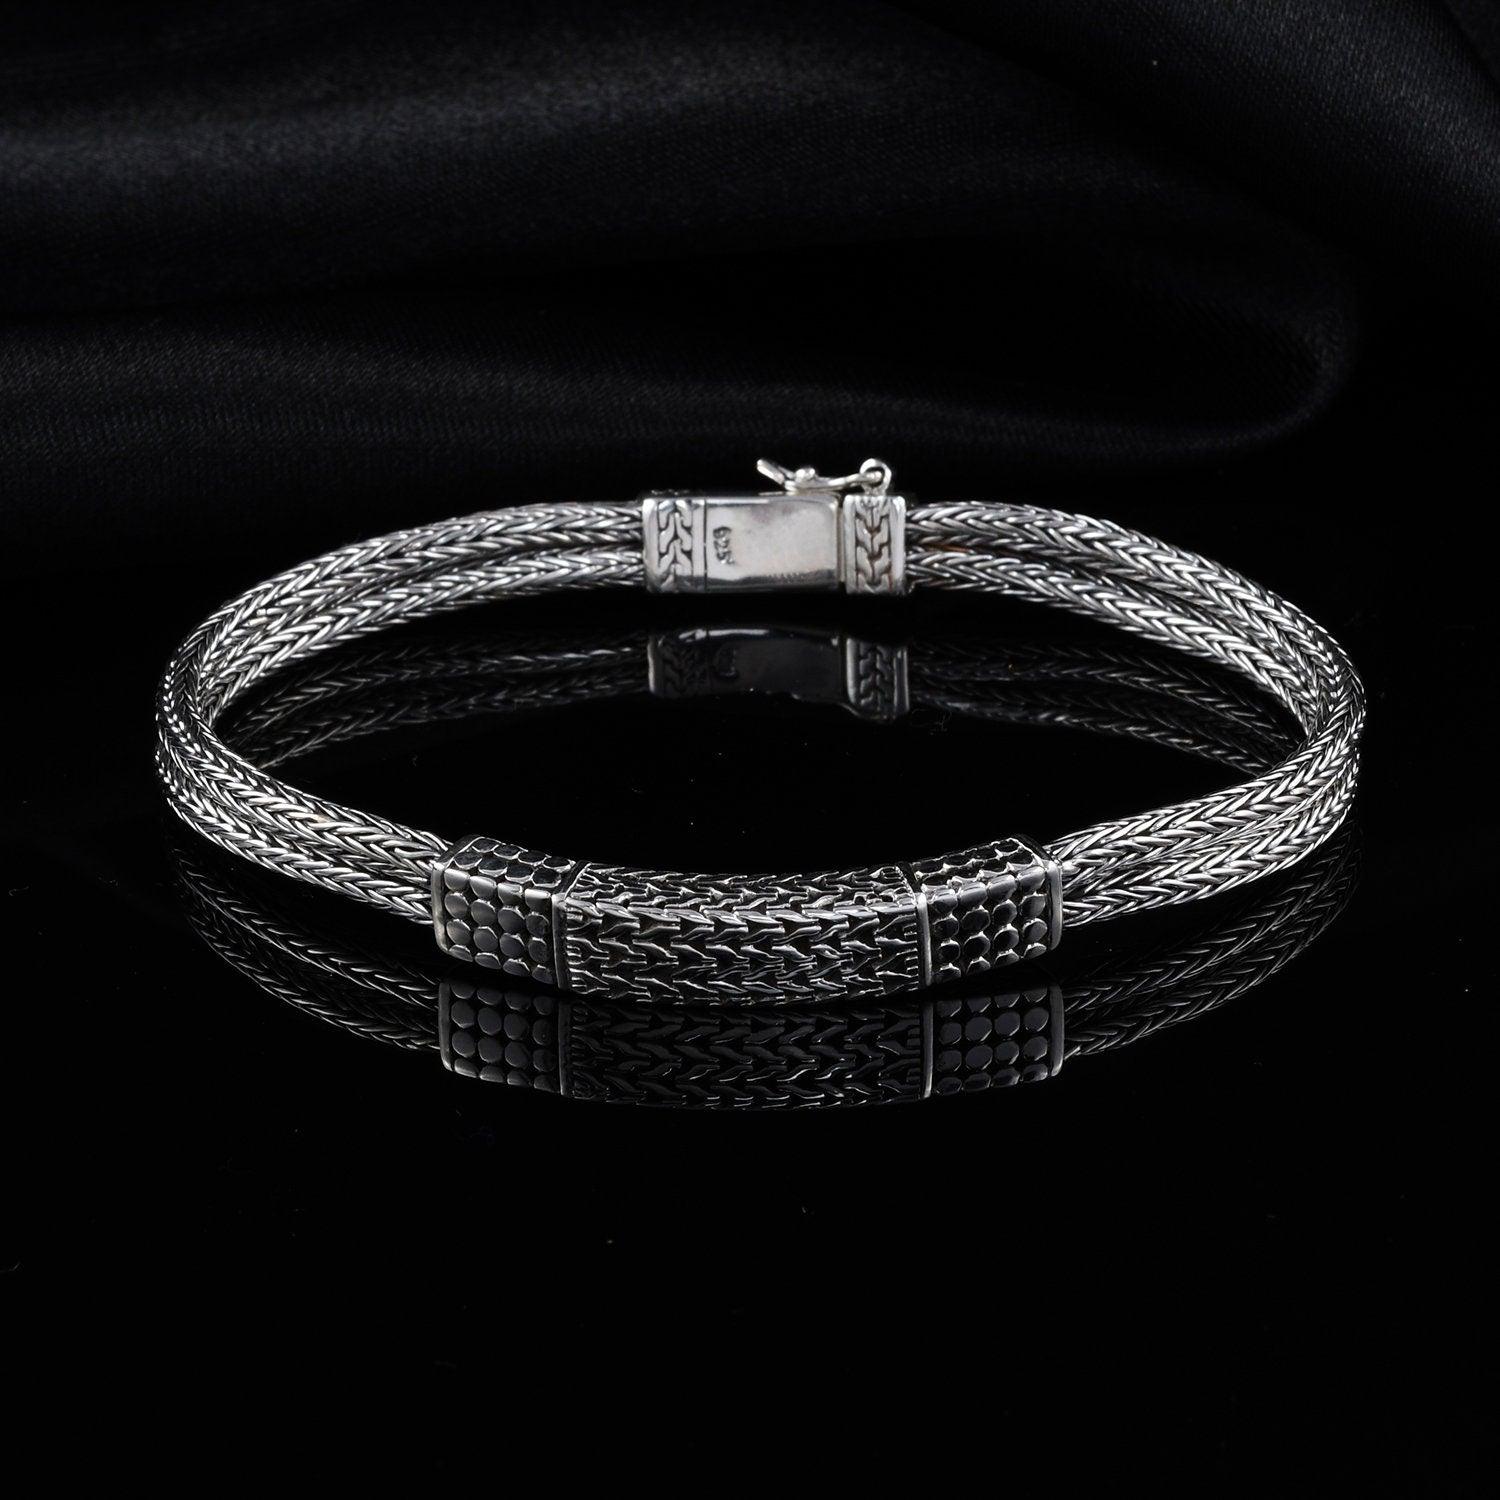 UNISEX Snake Chain Tag Bracelet Handmade in 925 Sterling Silver 7 mm Chain 8.25 - 9 Inches - Inspiring Jewellery